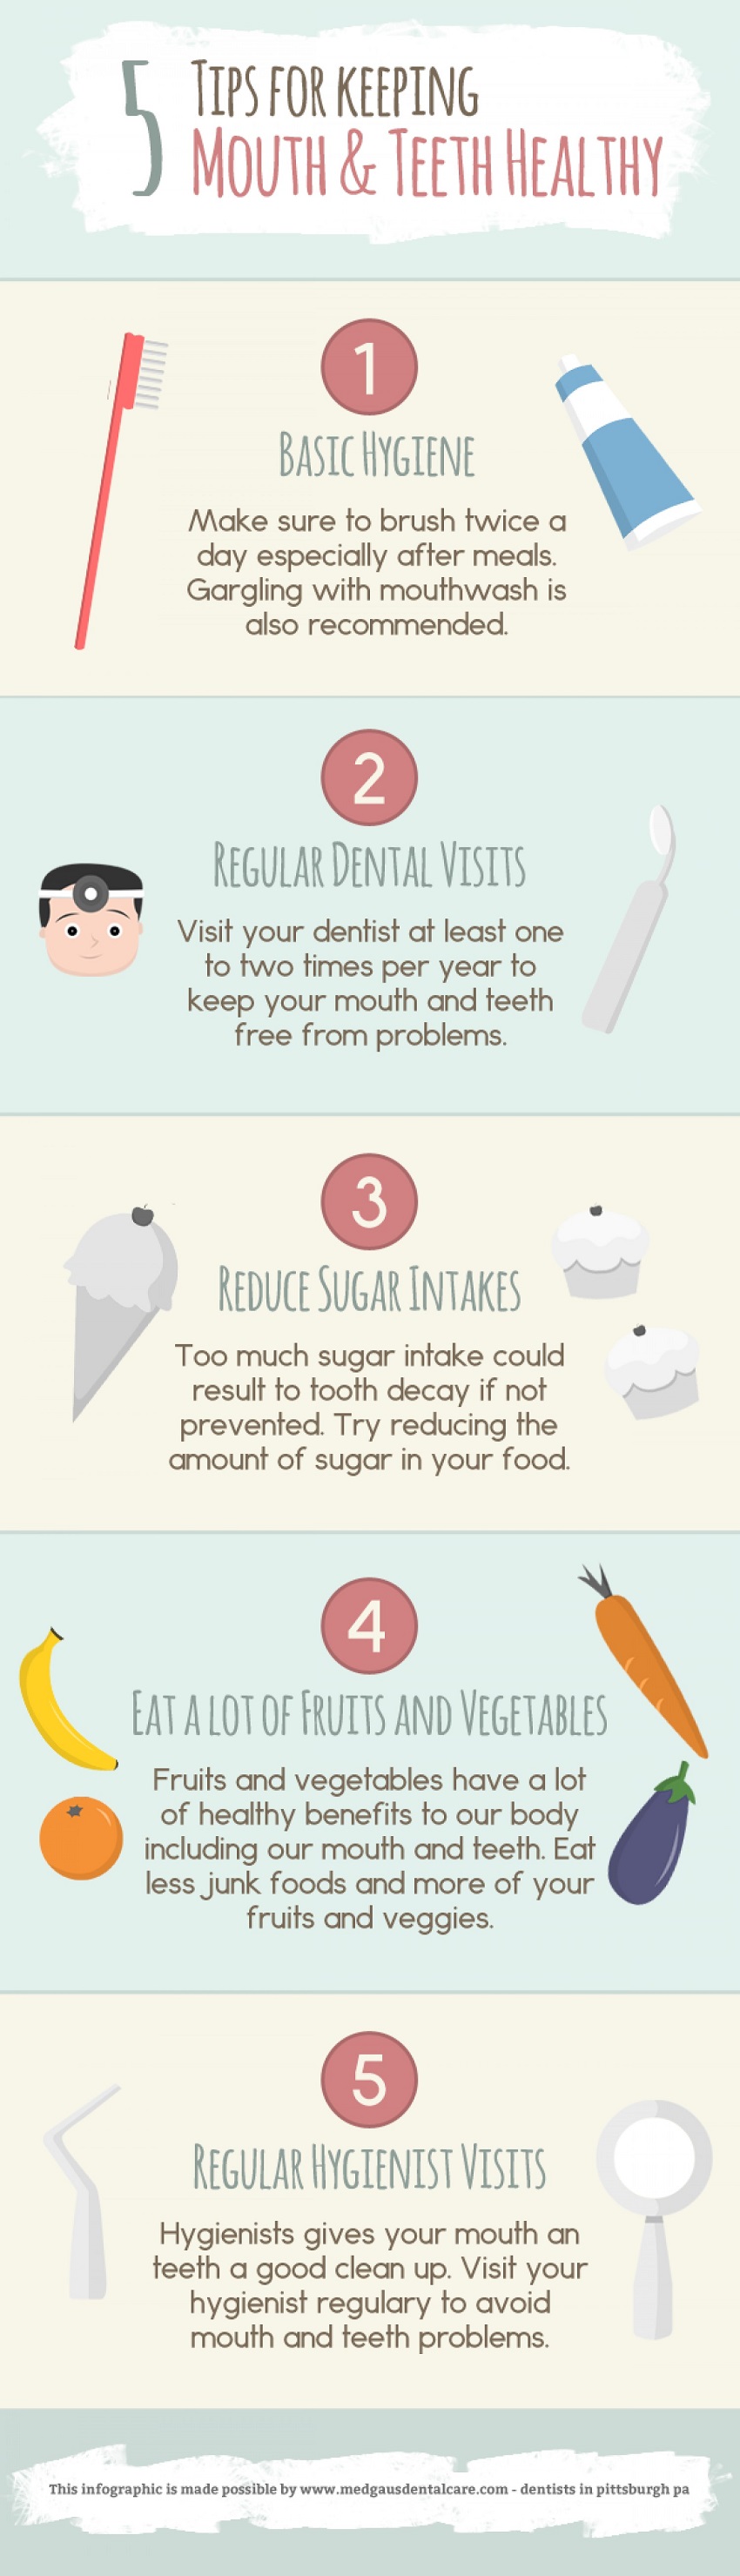 Salty Taste In the Mouth-5 Tips for Healthy Mouth